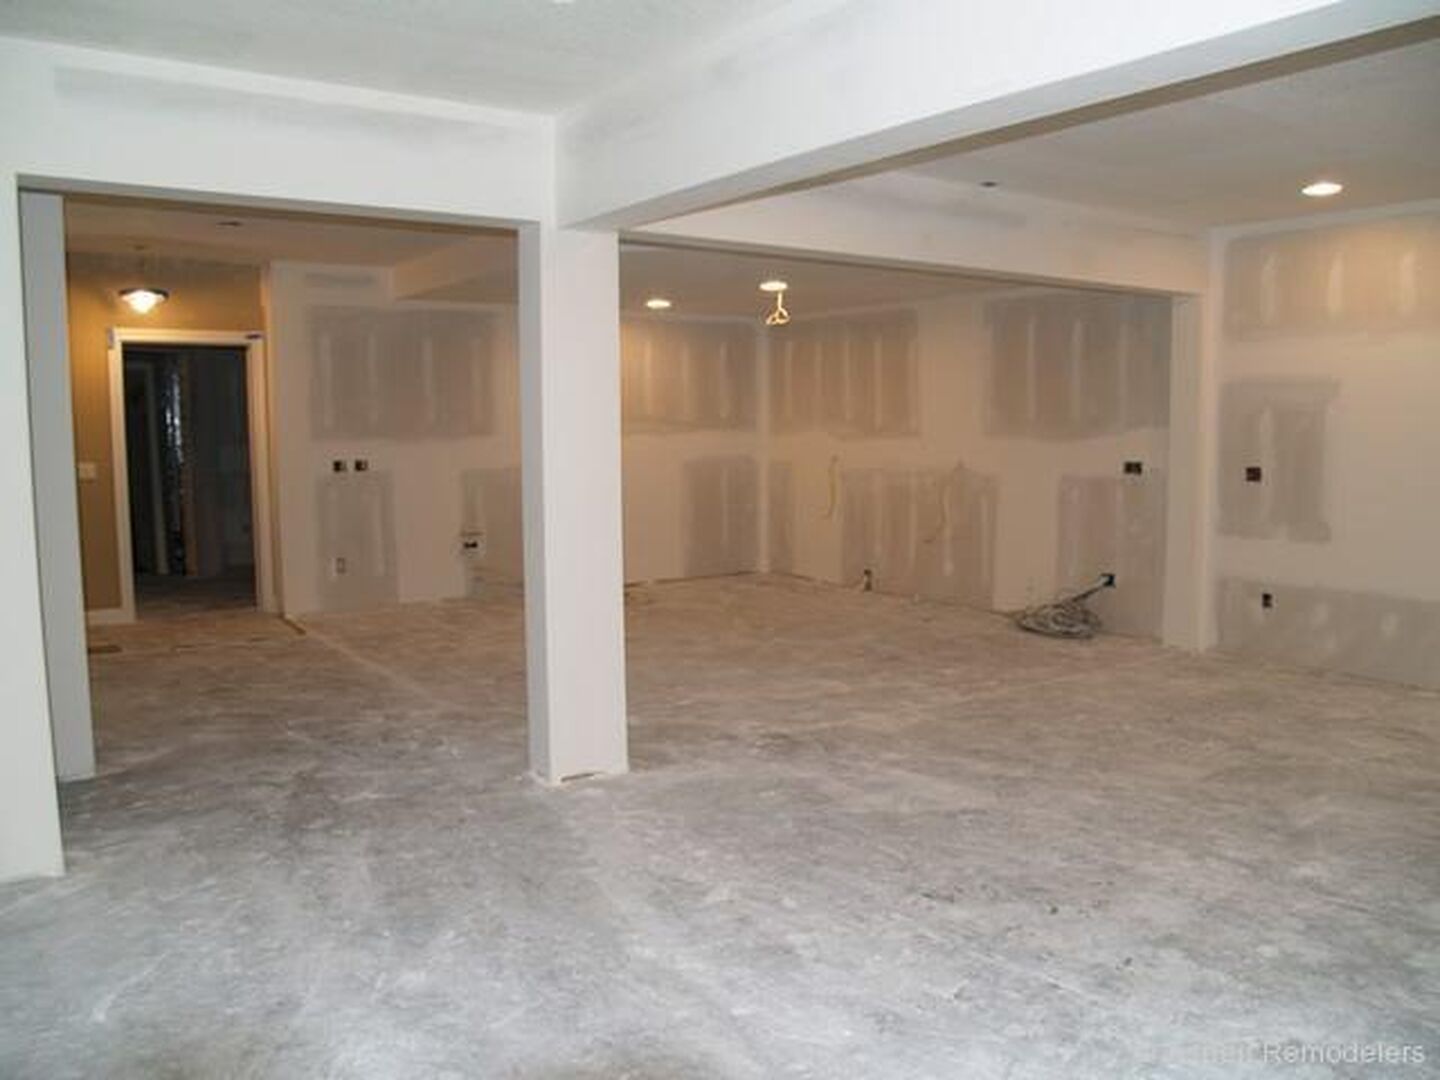 Basement Waterproofing Solutions: Plan for your Finished Basement